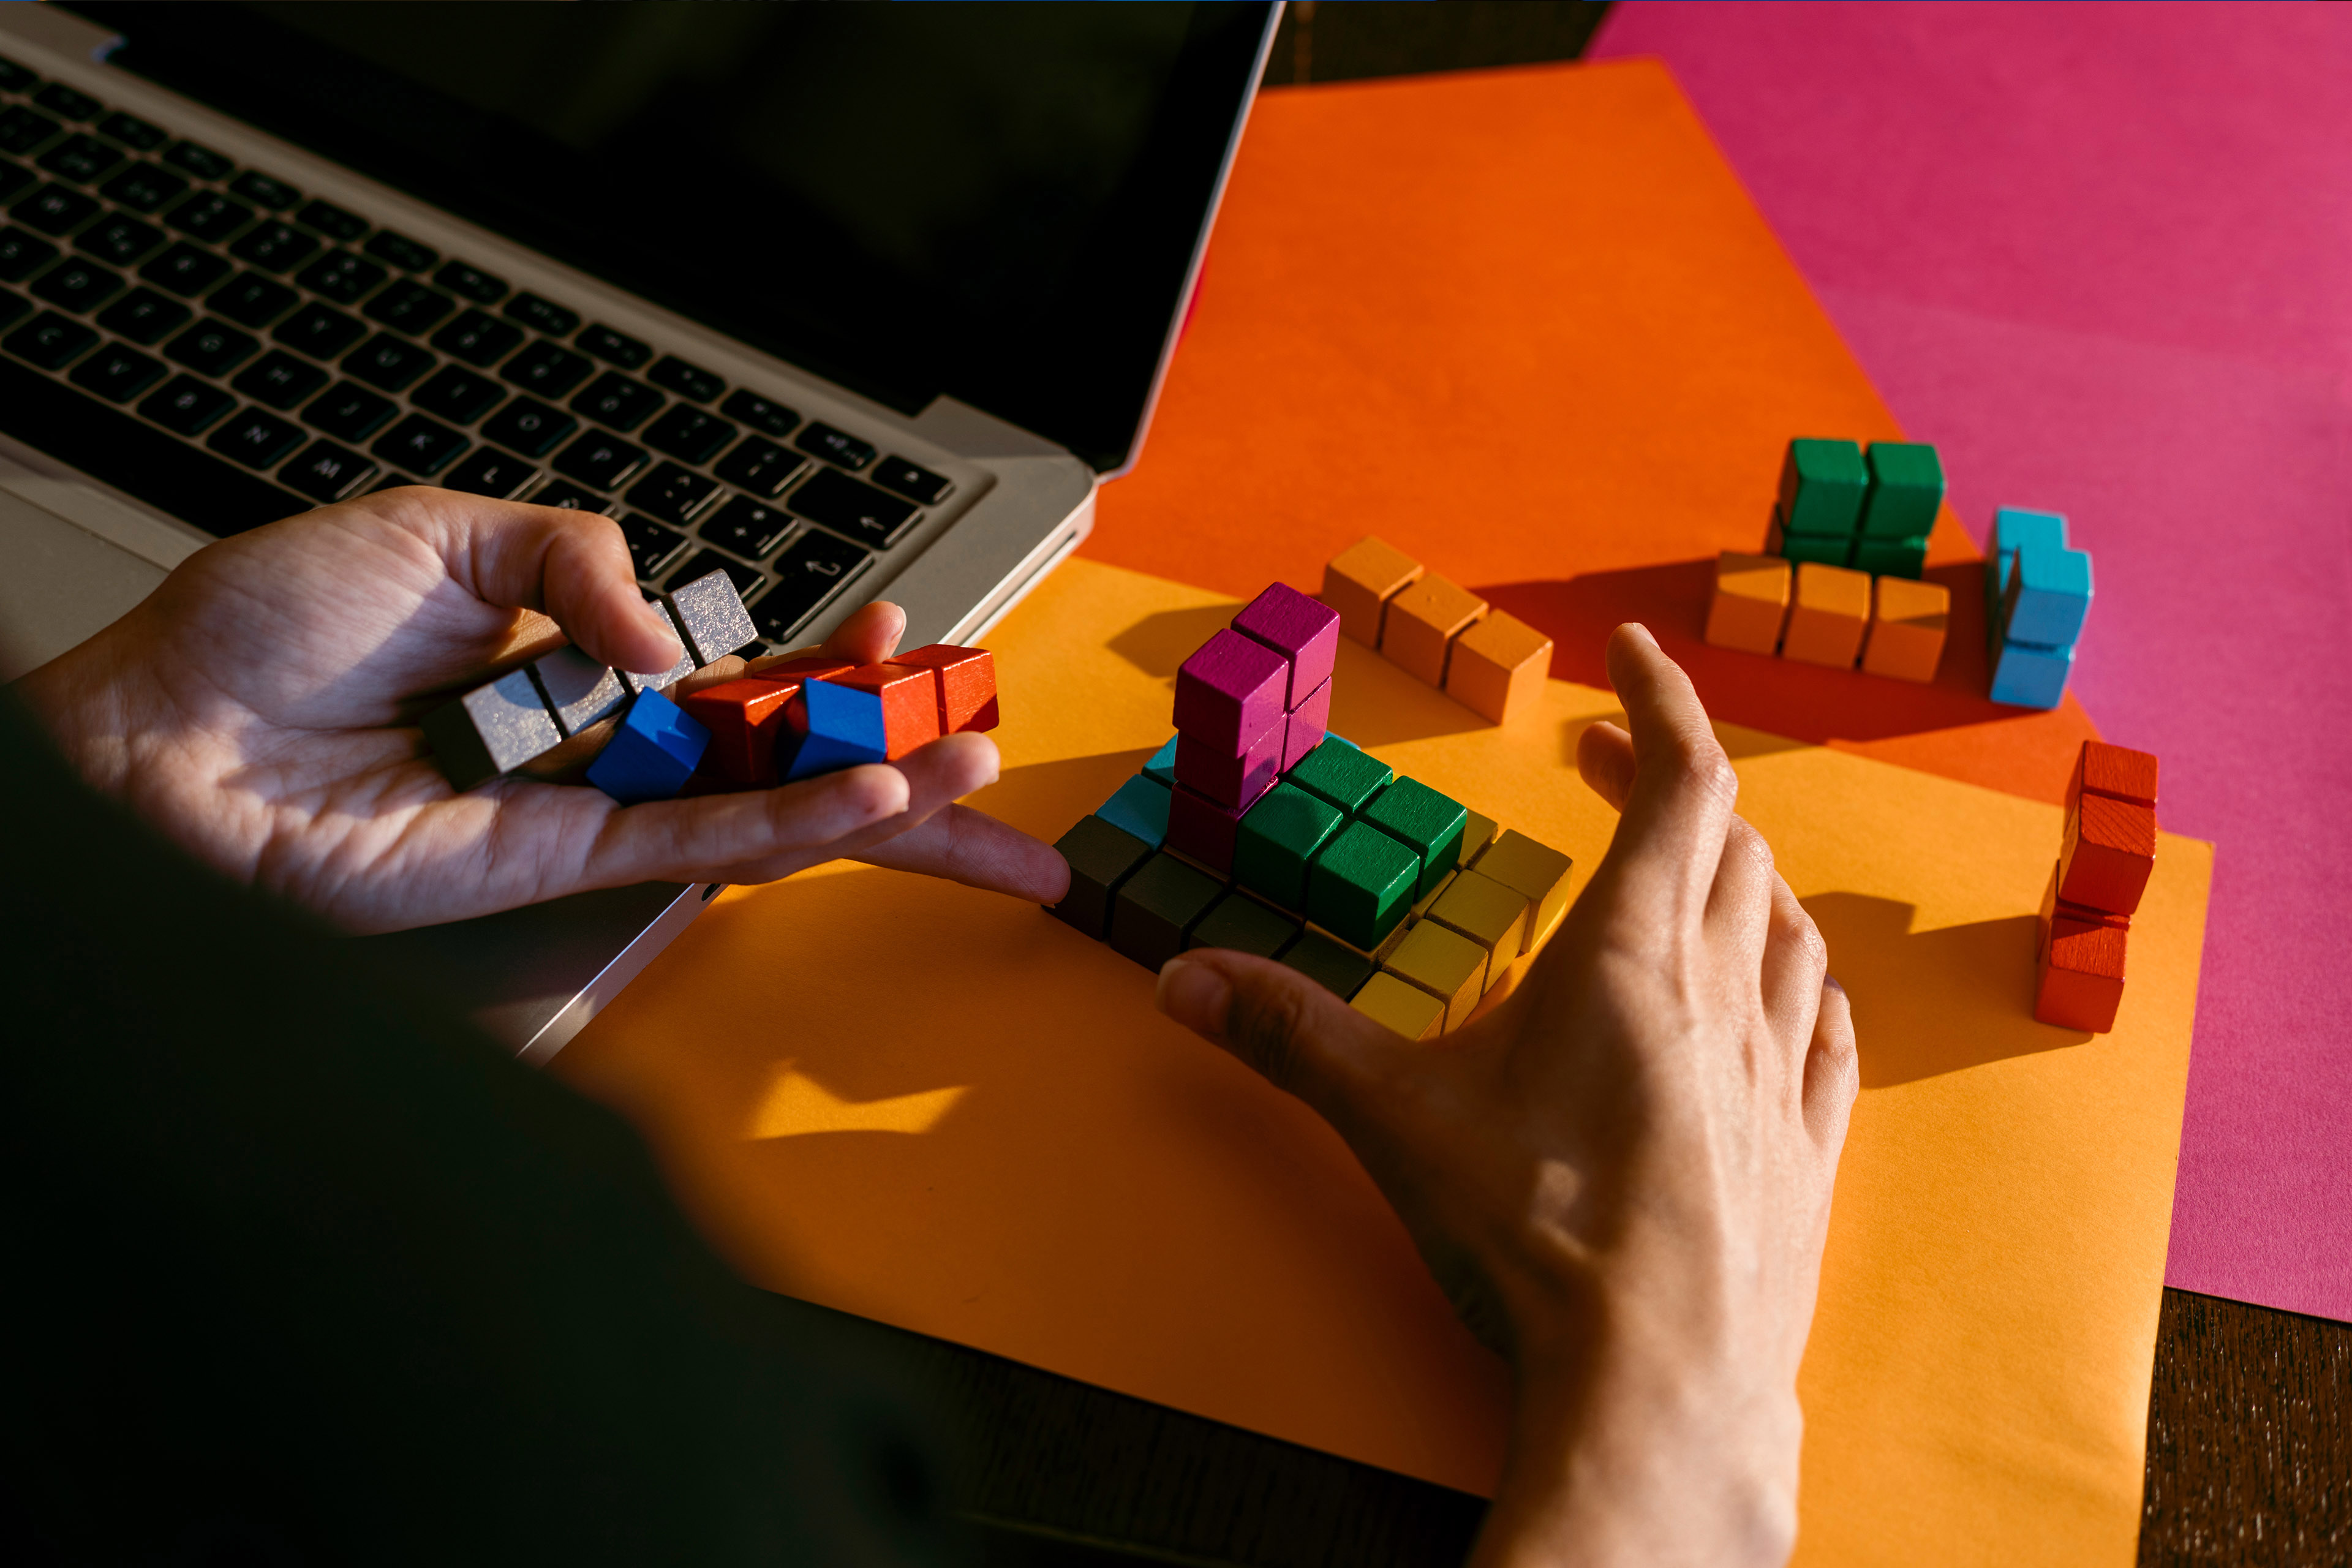 https://assets.ey.com/content/dam/ey-sites/ey-com/en_gl/topics/strategy/hero-images/ey-hands-of-businesswoman-playing-with-colorful-toy-blocks.jpg